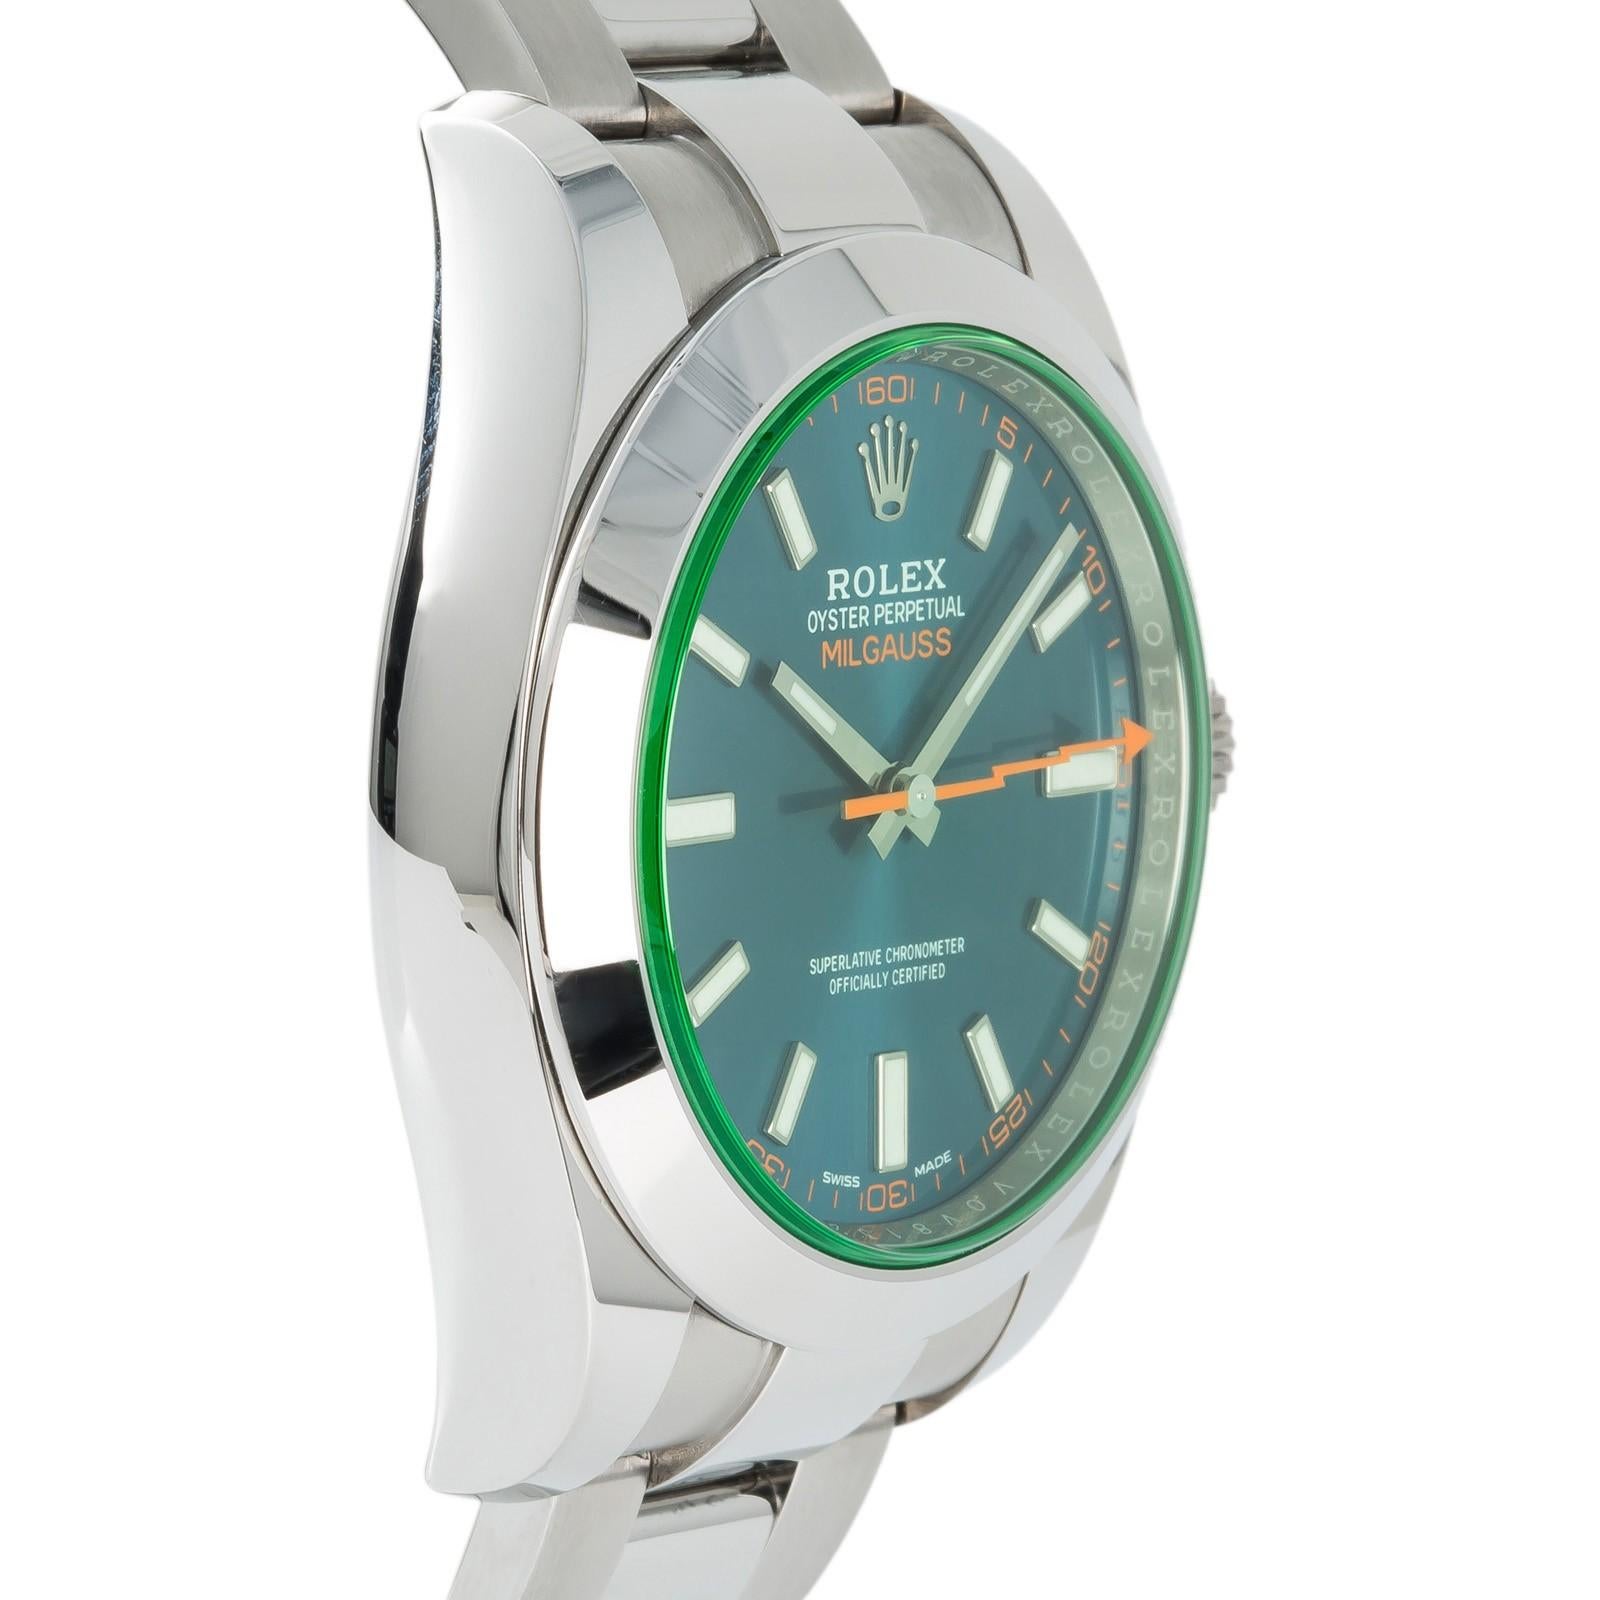 Rolex Milgauss 116400, Blue Dial Certified Authentic In Excellent Condition For Sale In Miami, FL